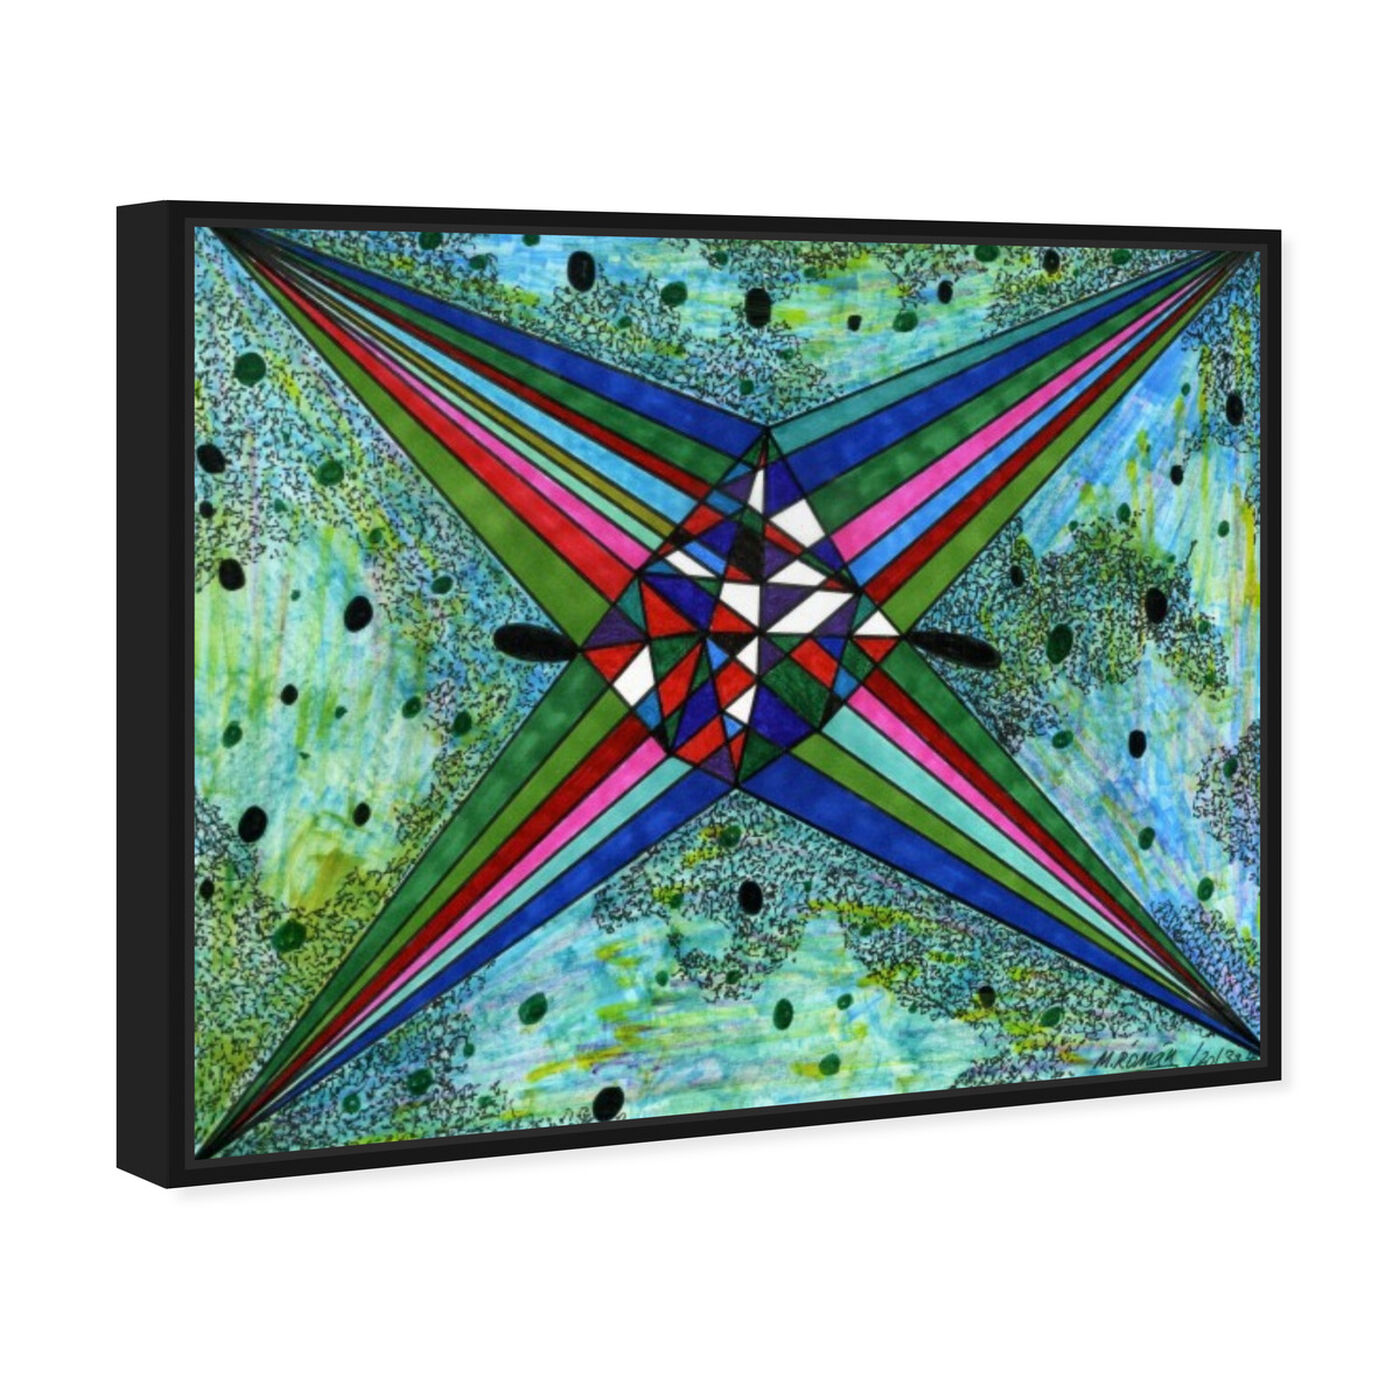 Angled view of Intergalactica featuring abstract and geometric art.